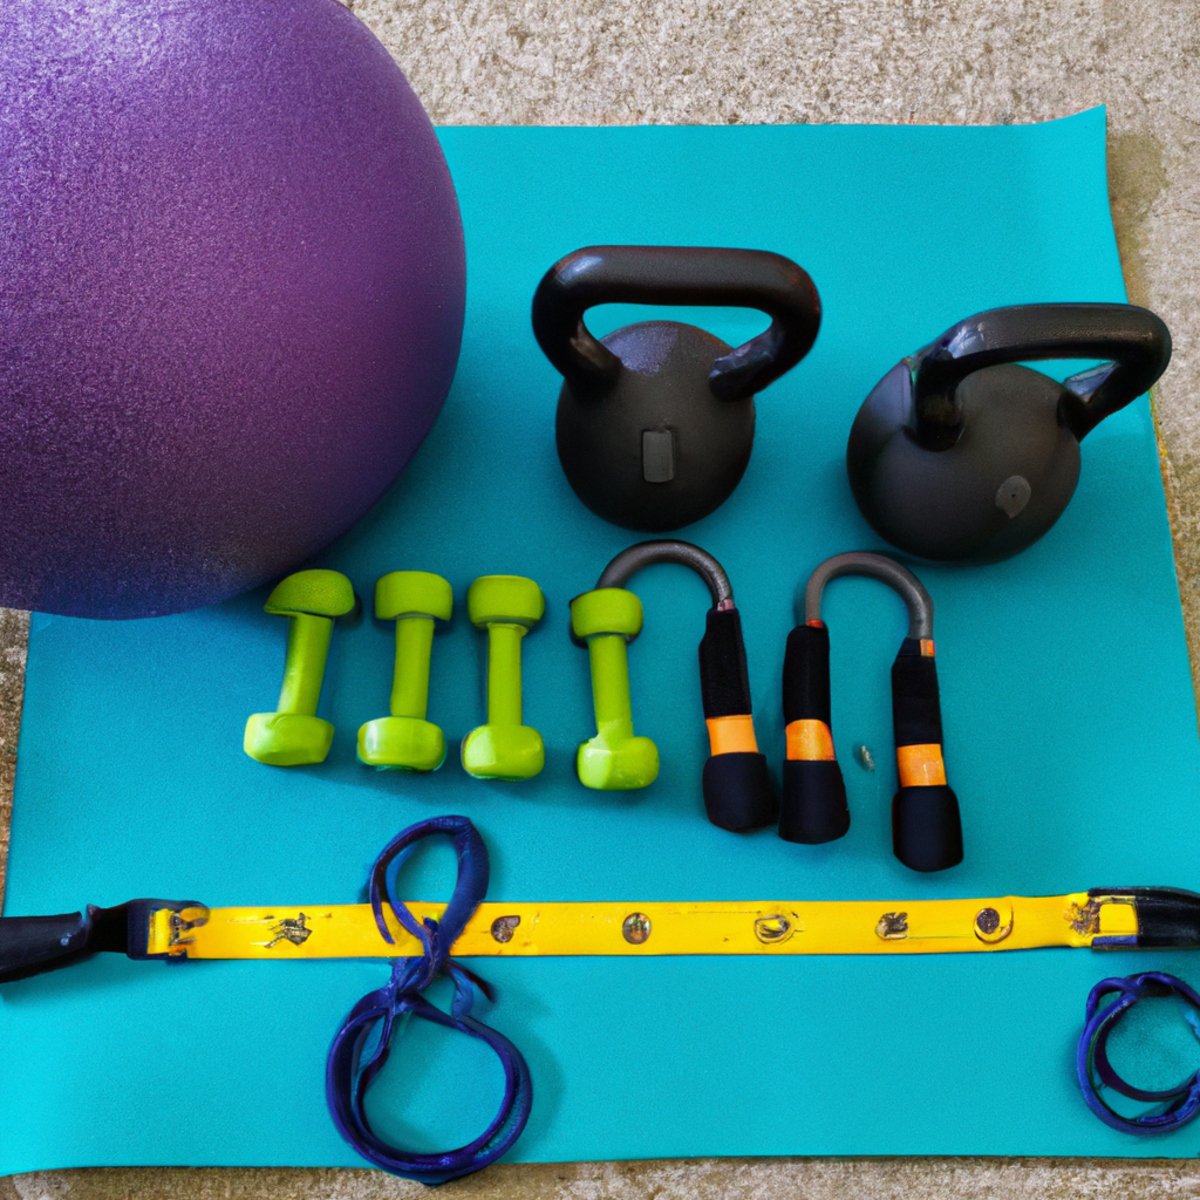 The photo captures a set of objects arranged neatly on a yoga mat. In the center, there is a pair of dumbbells, each weighing 5 pounds, with their handles facing upwards. To the left, there is a resistance band, stretched out and ready for use. On the right, there is a small medicine ball, weighing 8 pounds, with a textured surface for better grip. In the background, there is a foam roller, used for self-massage and stretching. The lighting is bright and natural, highlighting the vibrant colors of the objects and creating a sense of energy and motivation. The photo invites the reader to try out the bodyweight exercises described in the article, using these simple yet effective tools to burn fat and build endurance.